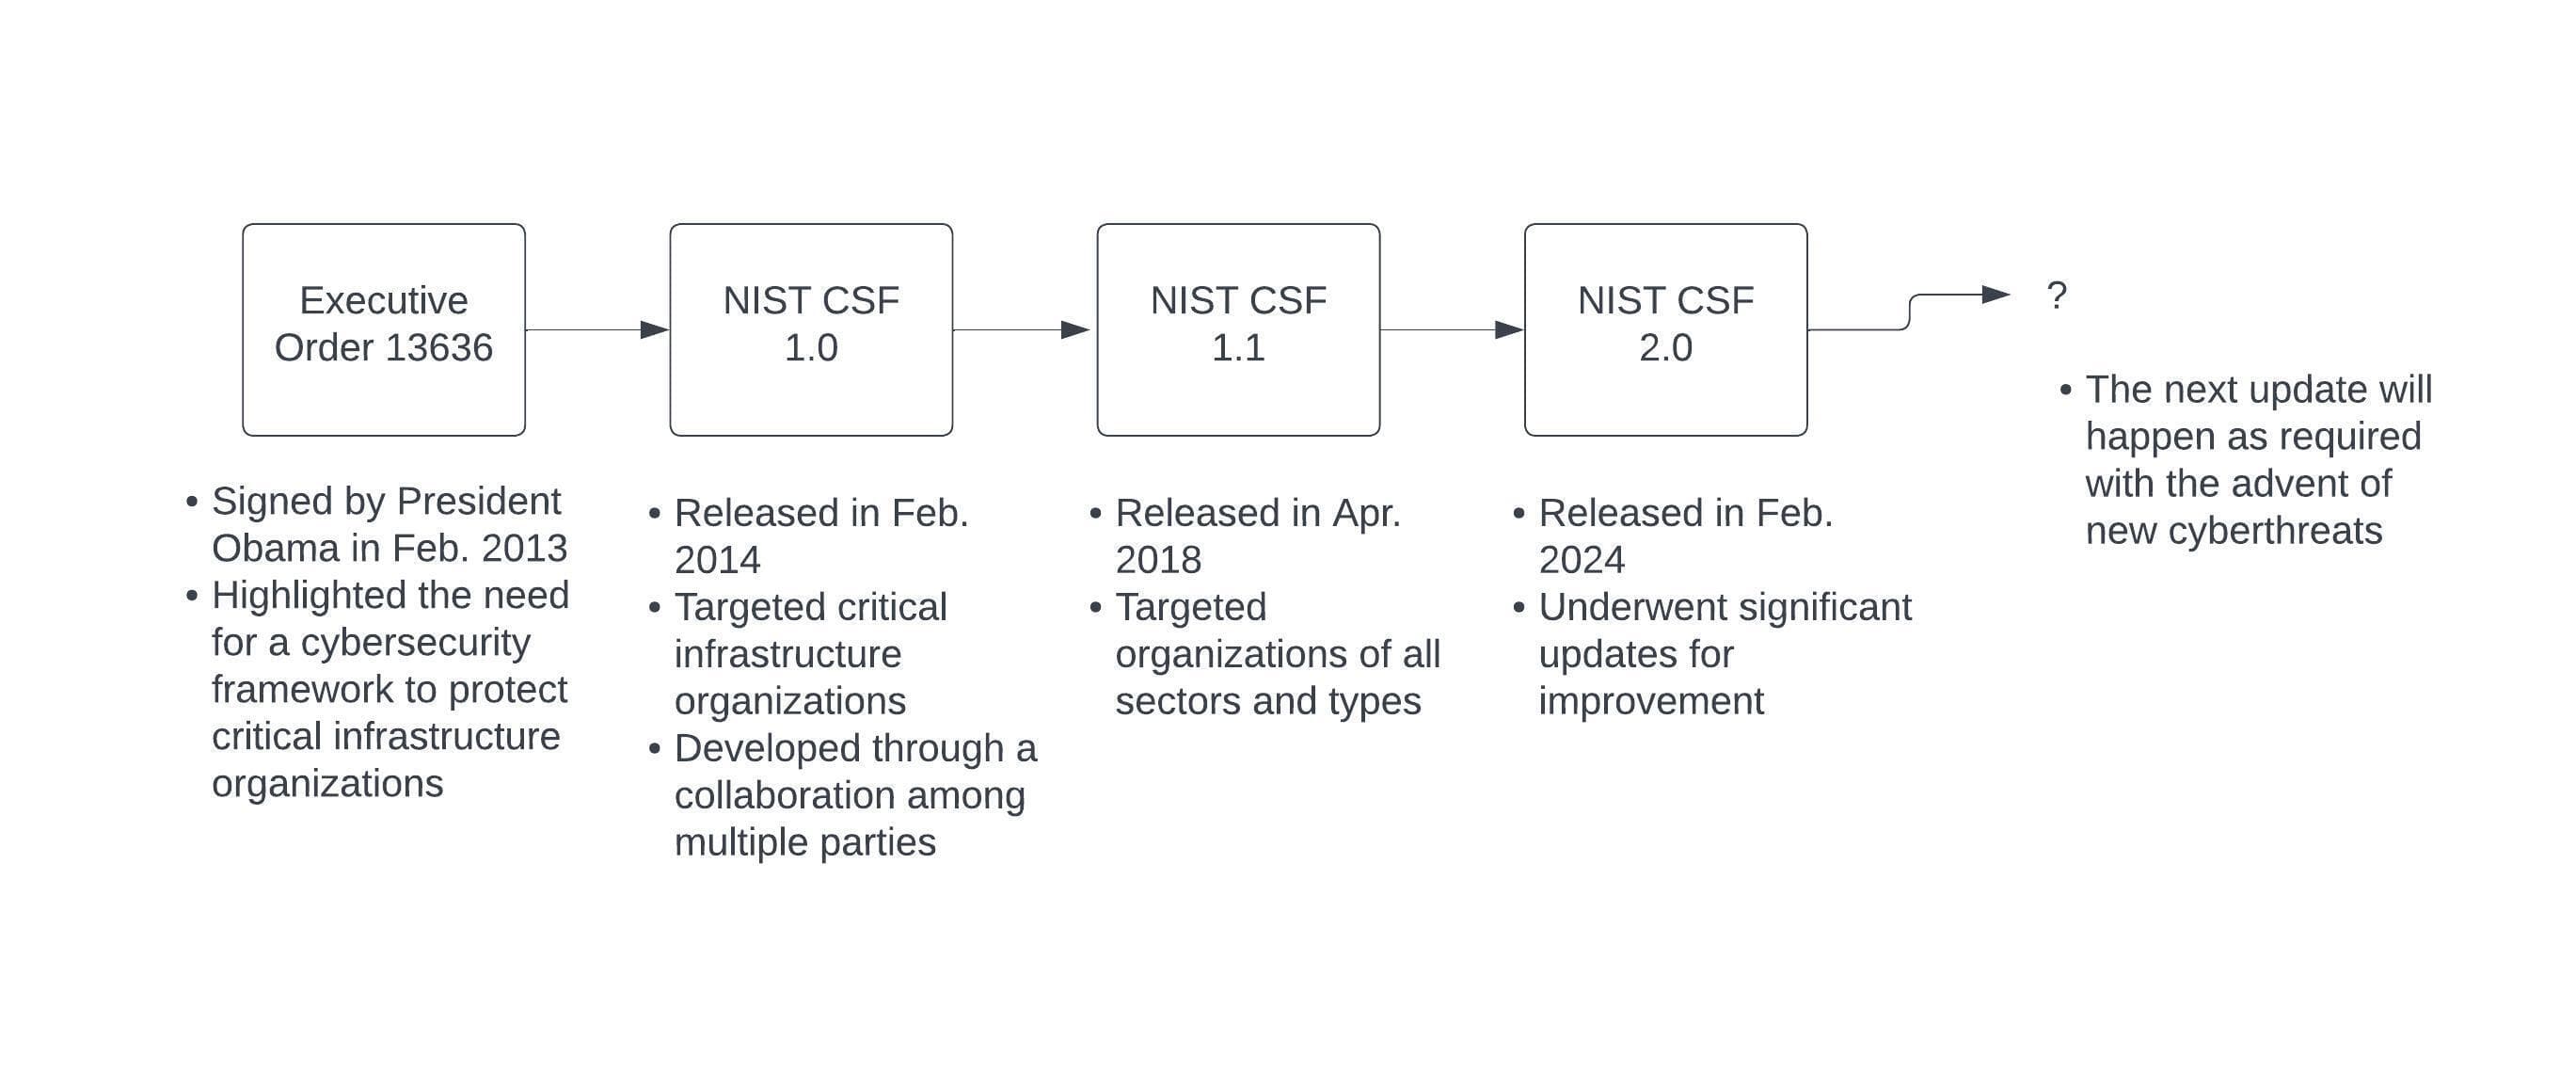 The evolution of NIST CSF from 2013 to 2024